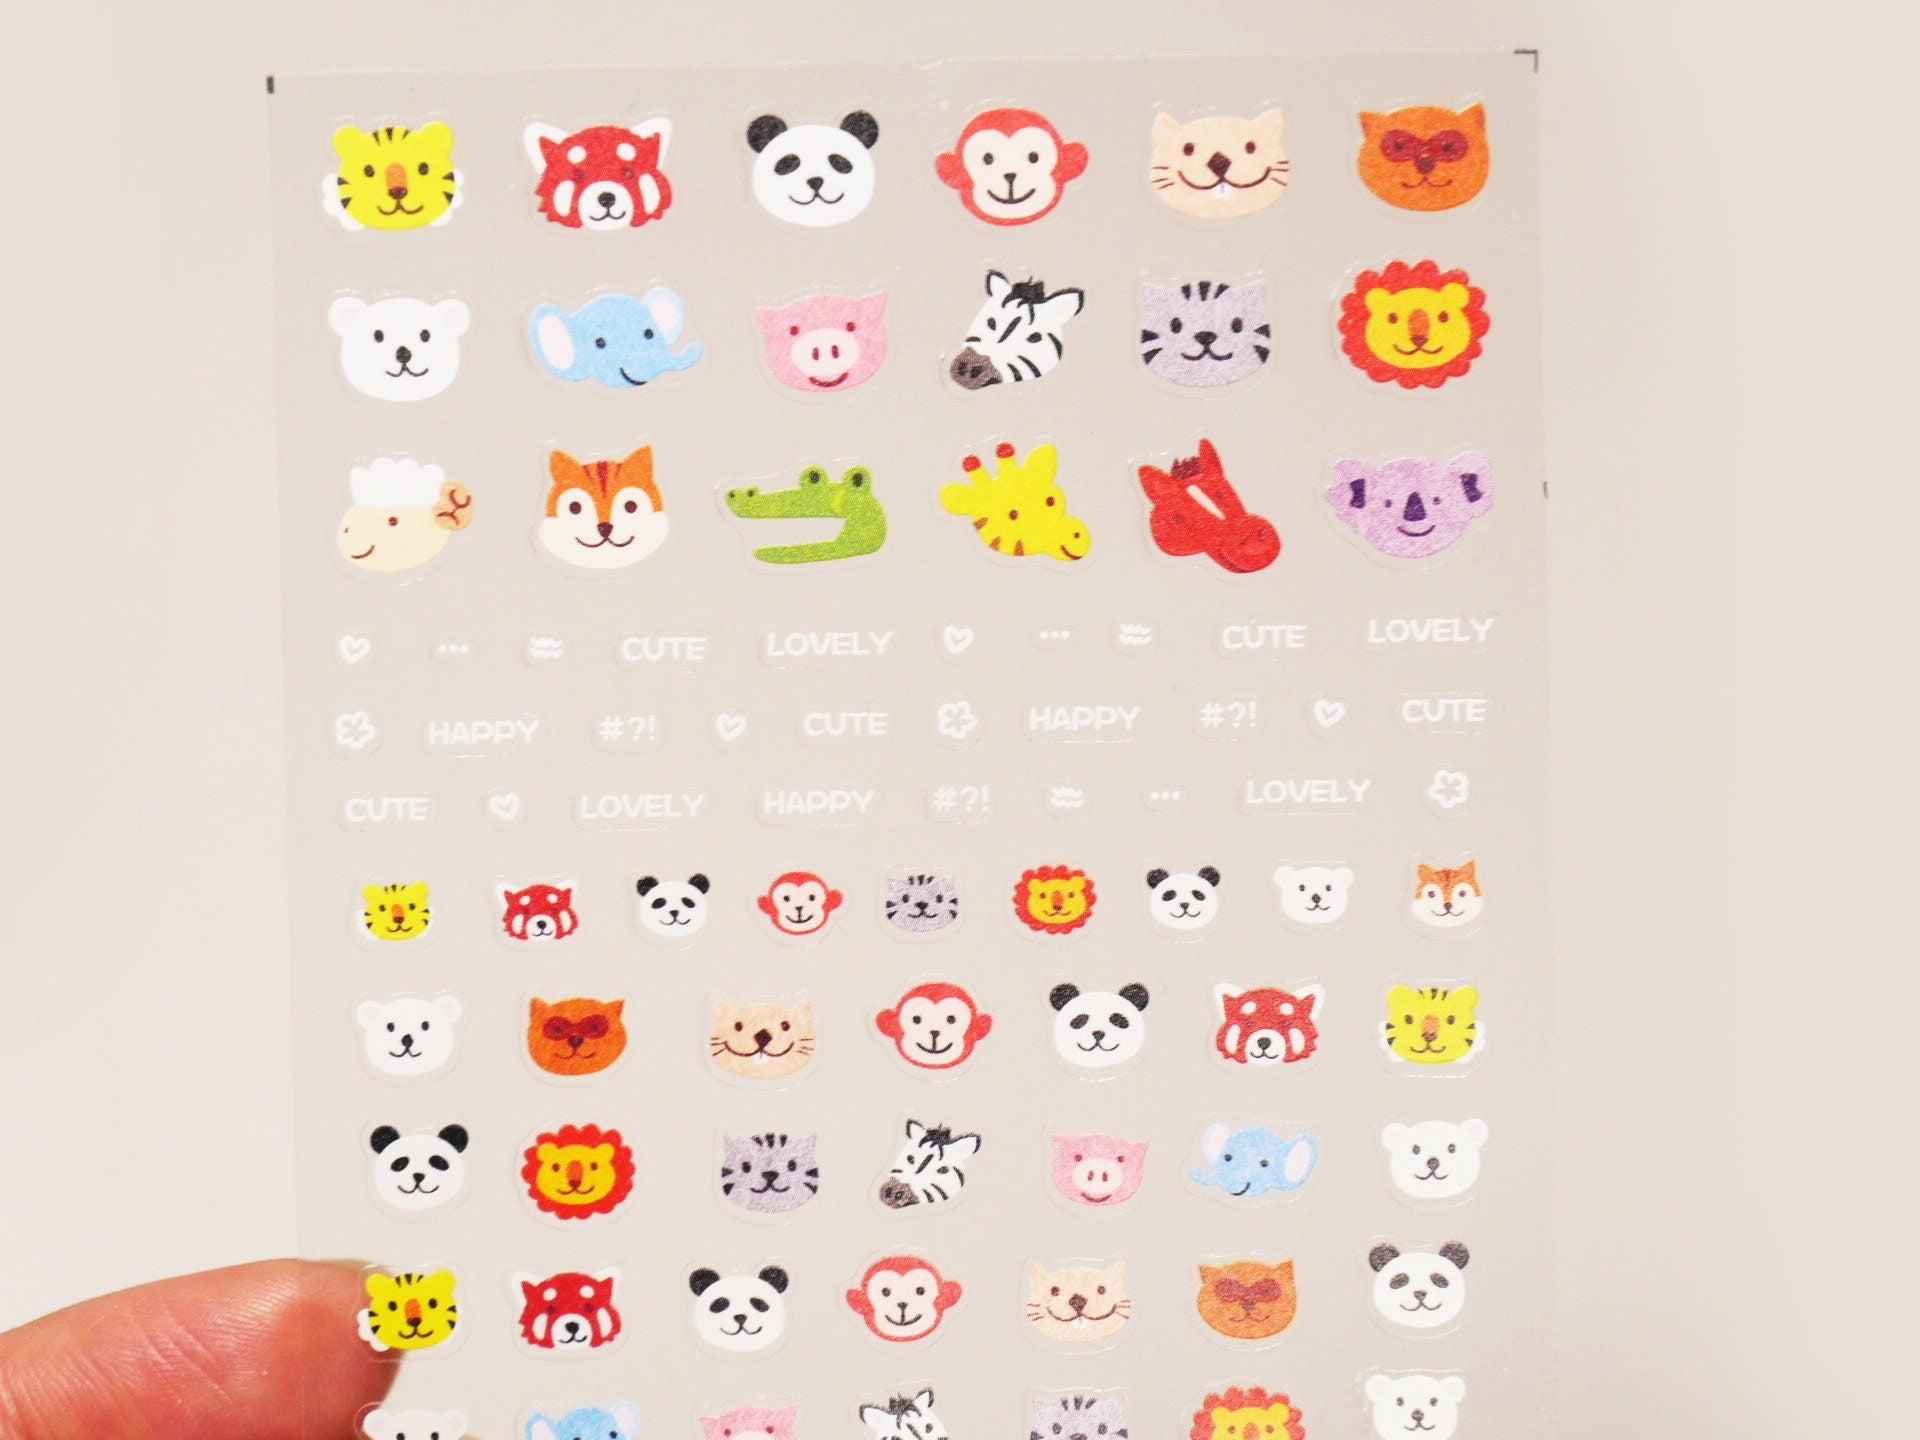 Cute Animals nail sticker/Pro 3D Embossed Bunny Bear Panda Kids Stickers Self Adhesive Decals/ Ultra thin Lovely Zoo Safe peel off sticker